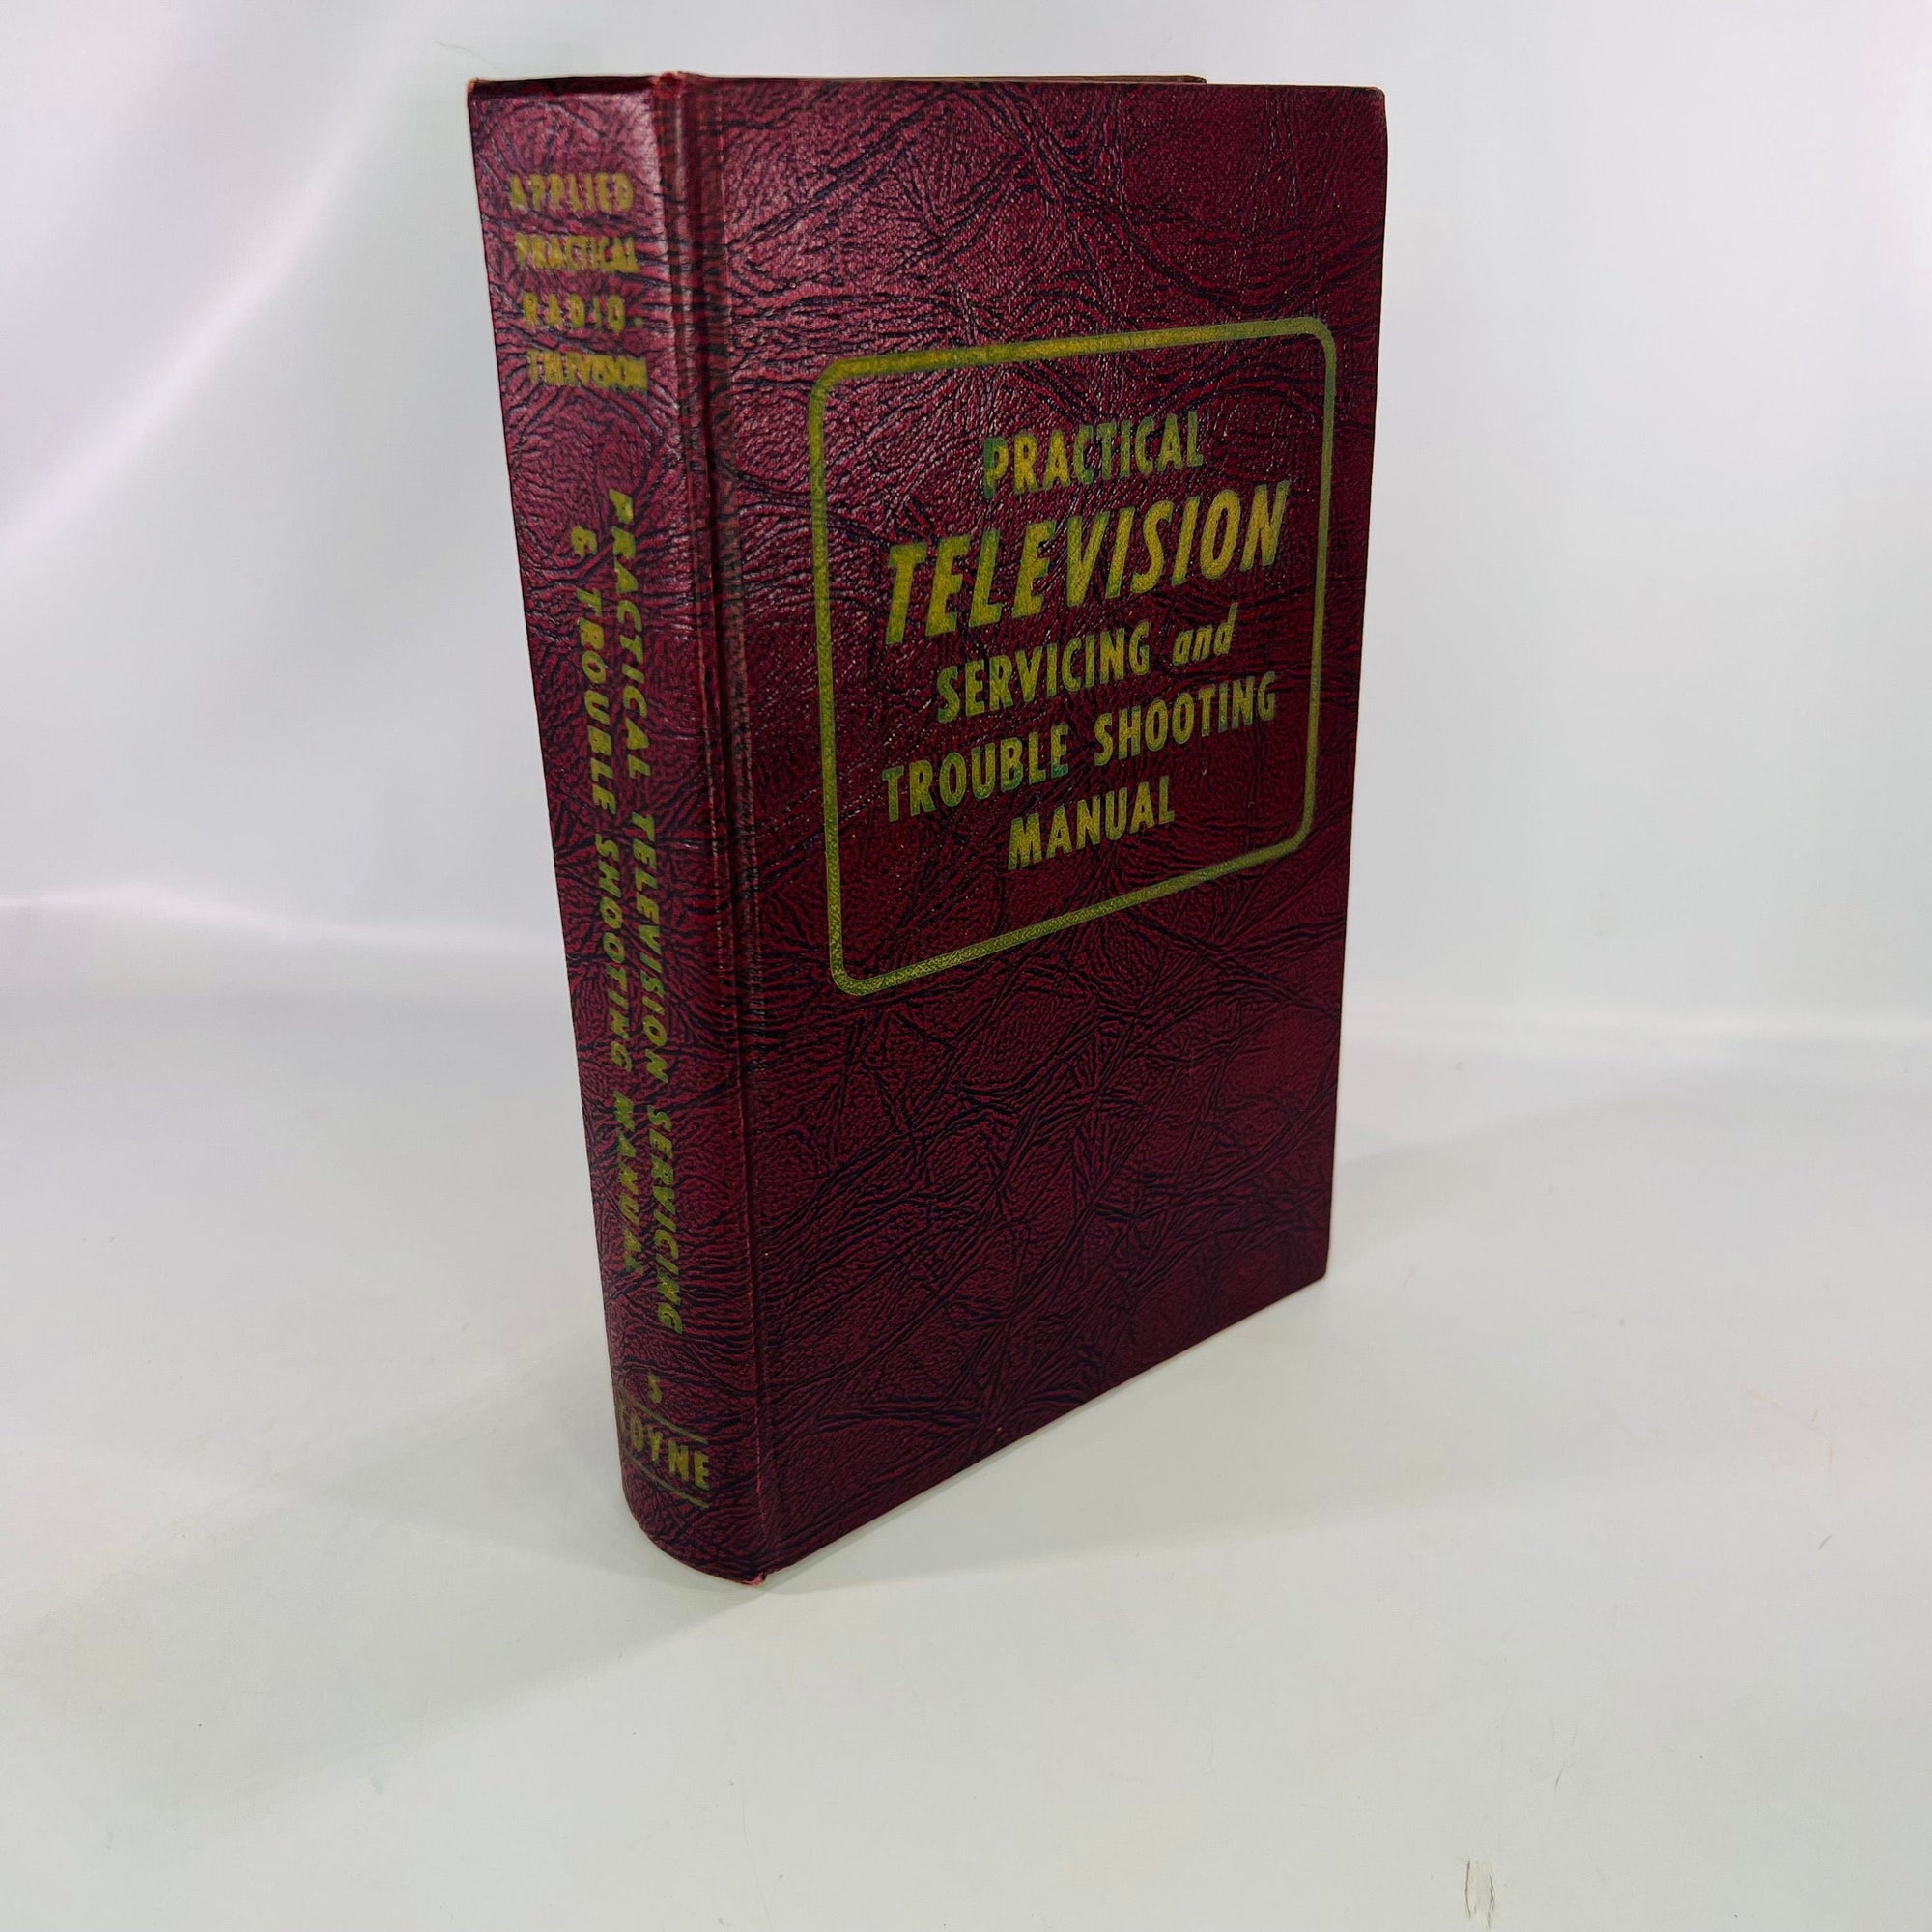 Practical Television Servicing & Trouble Shooting Manual by Technical Staff 1957 Book Number Three Coyne Electrical and Radio School